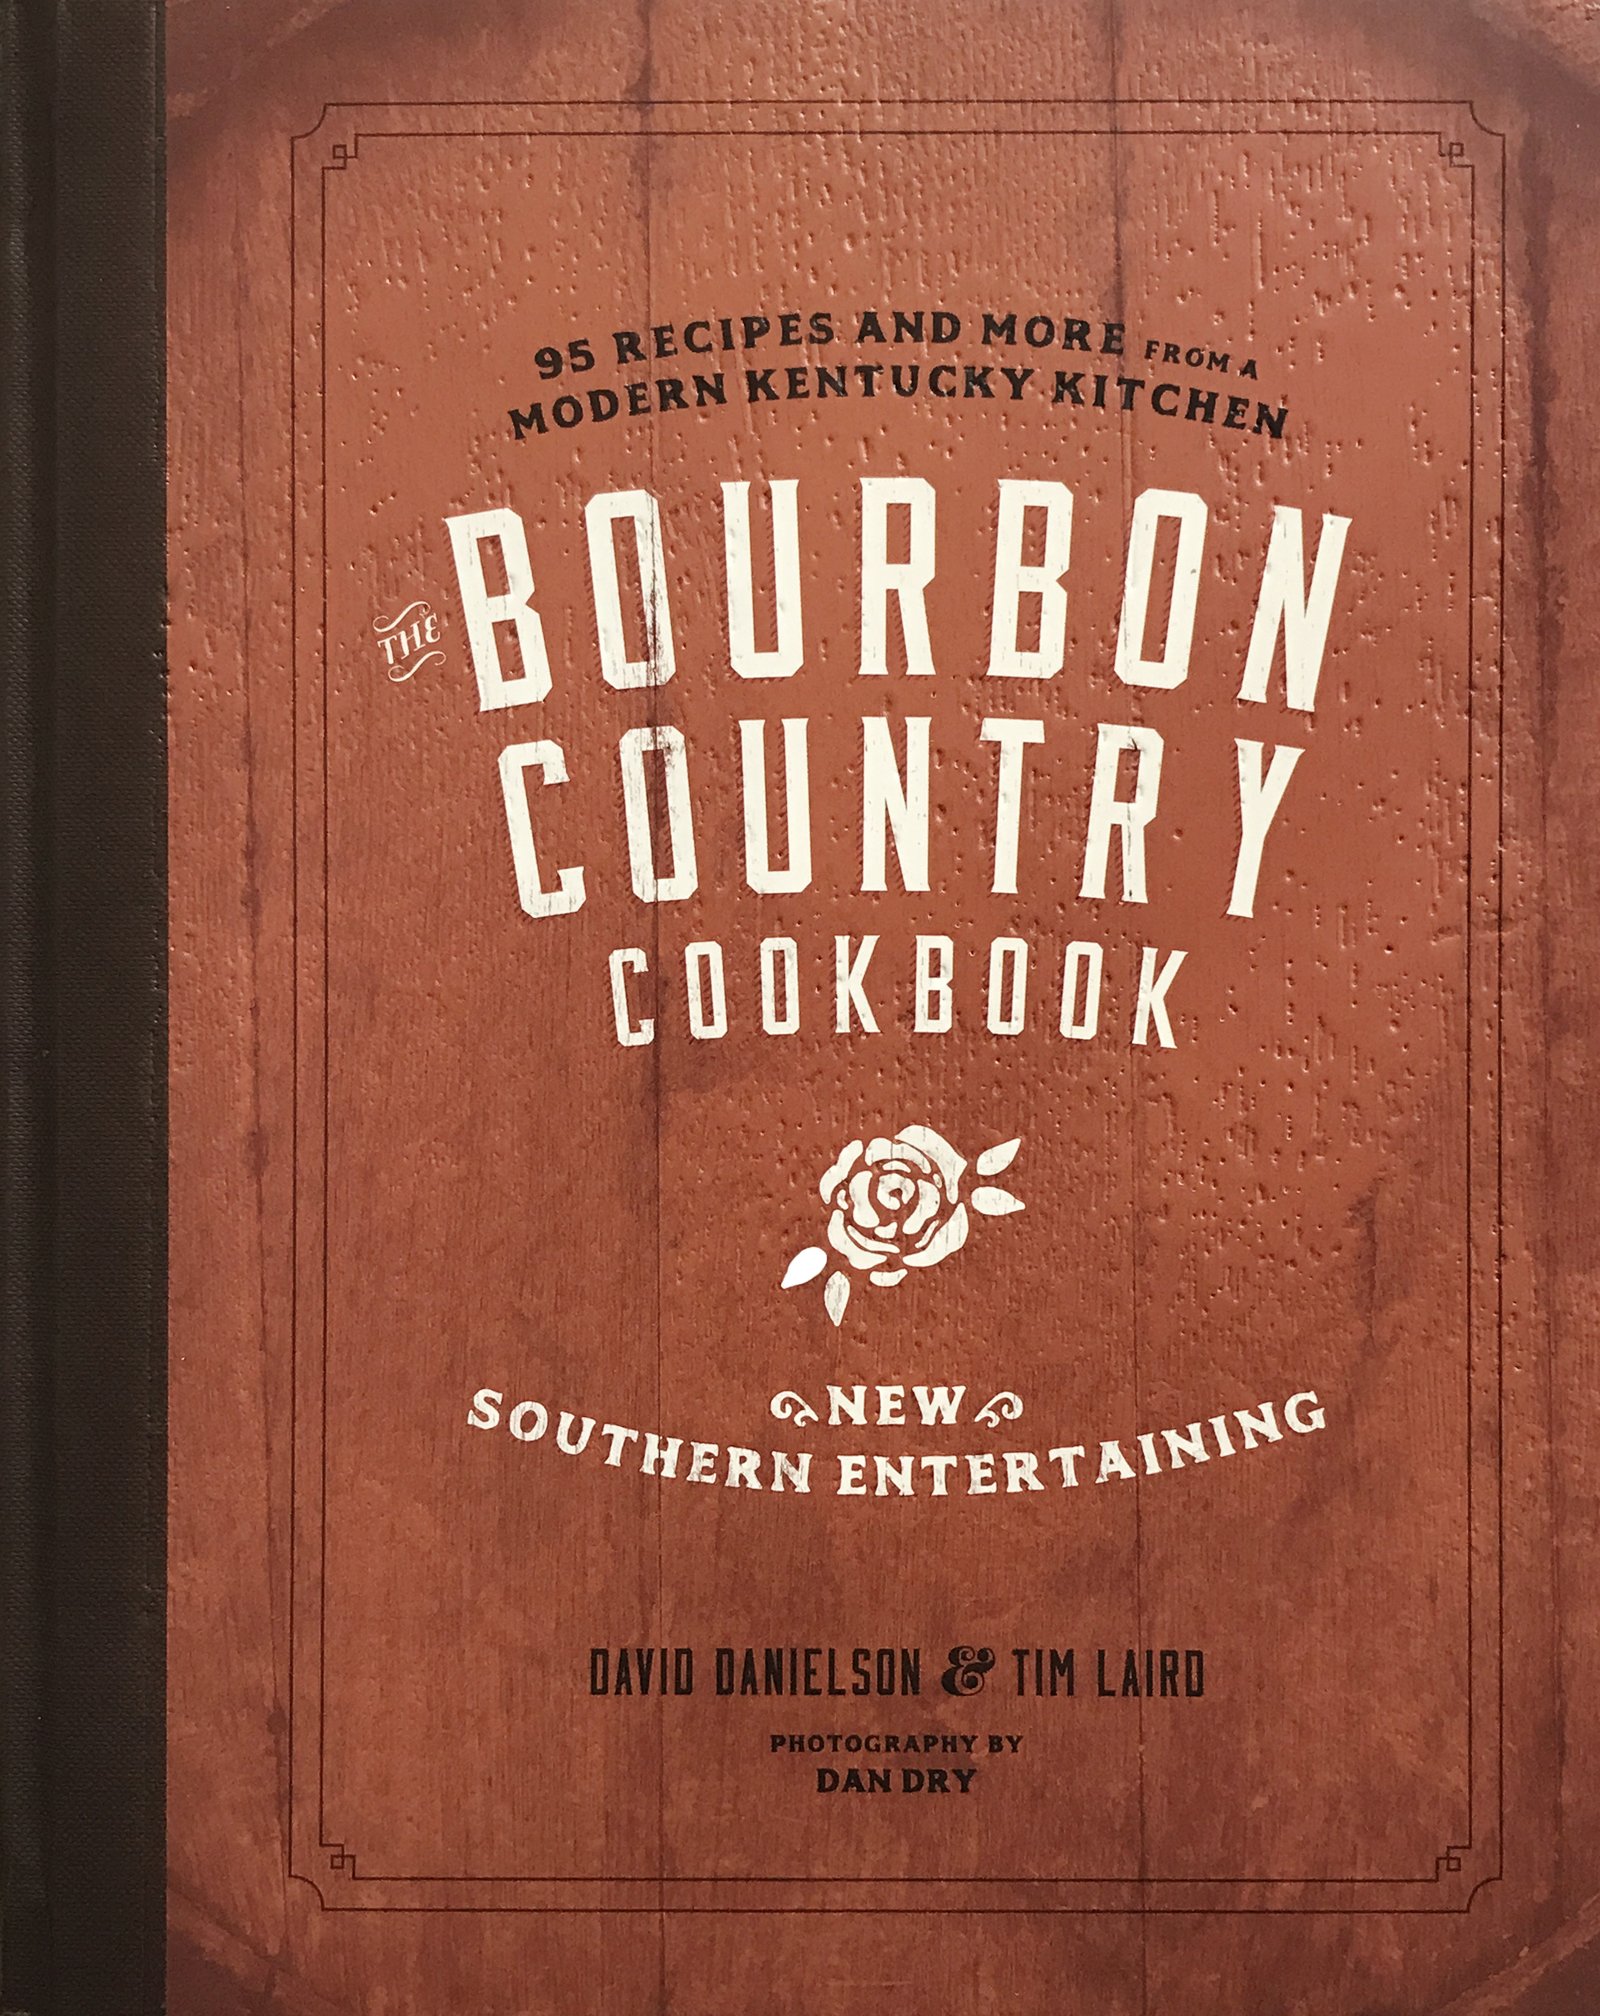 Cookbook cover for THE BOURBON COUNTRY COOKBOOK: New Southern Entertaining: 95 Recipes and More from a Modern Kentucky Kitchen